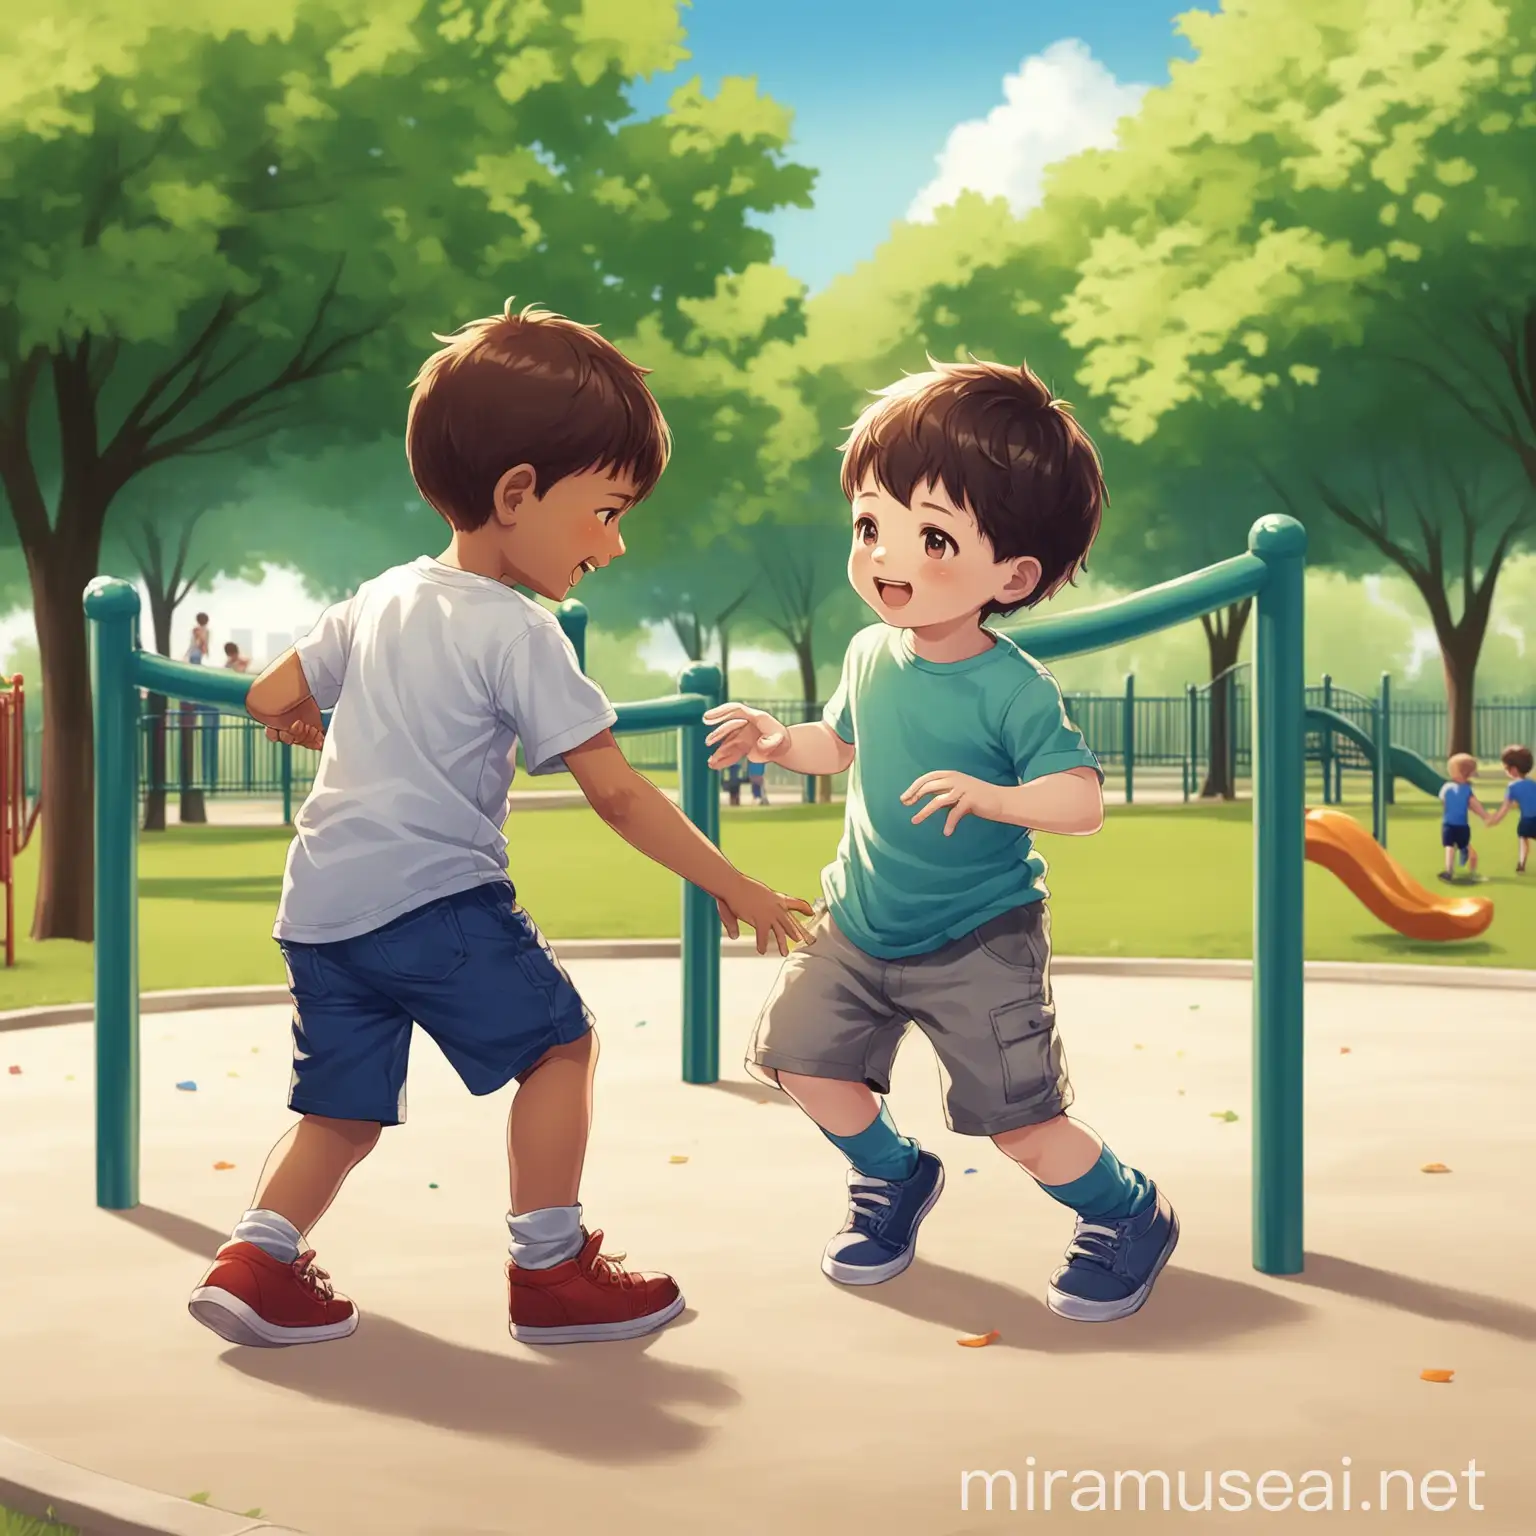 Two Boys Enjoying Playtime in the Park